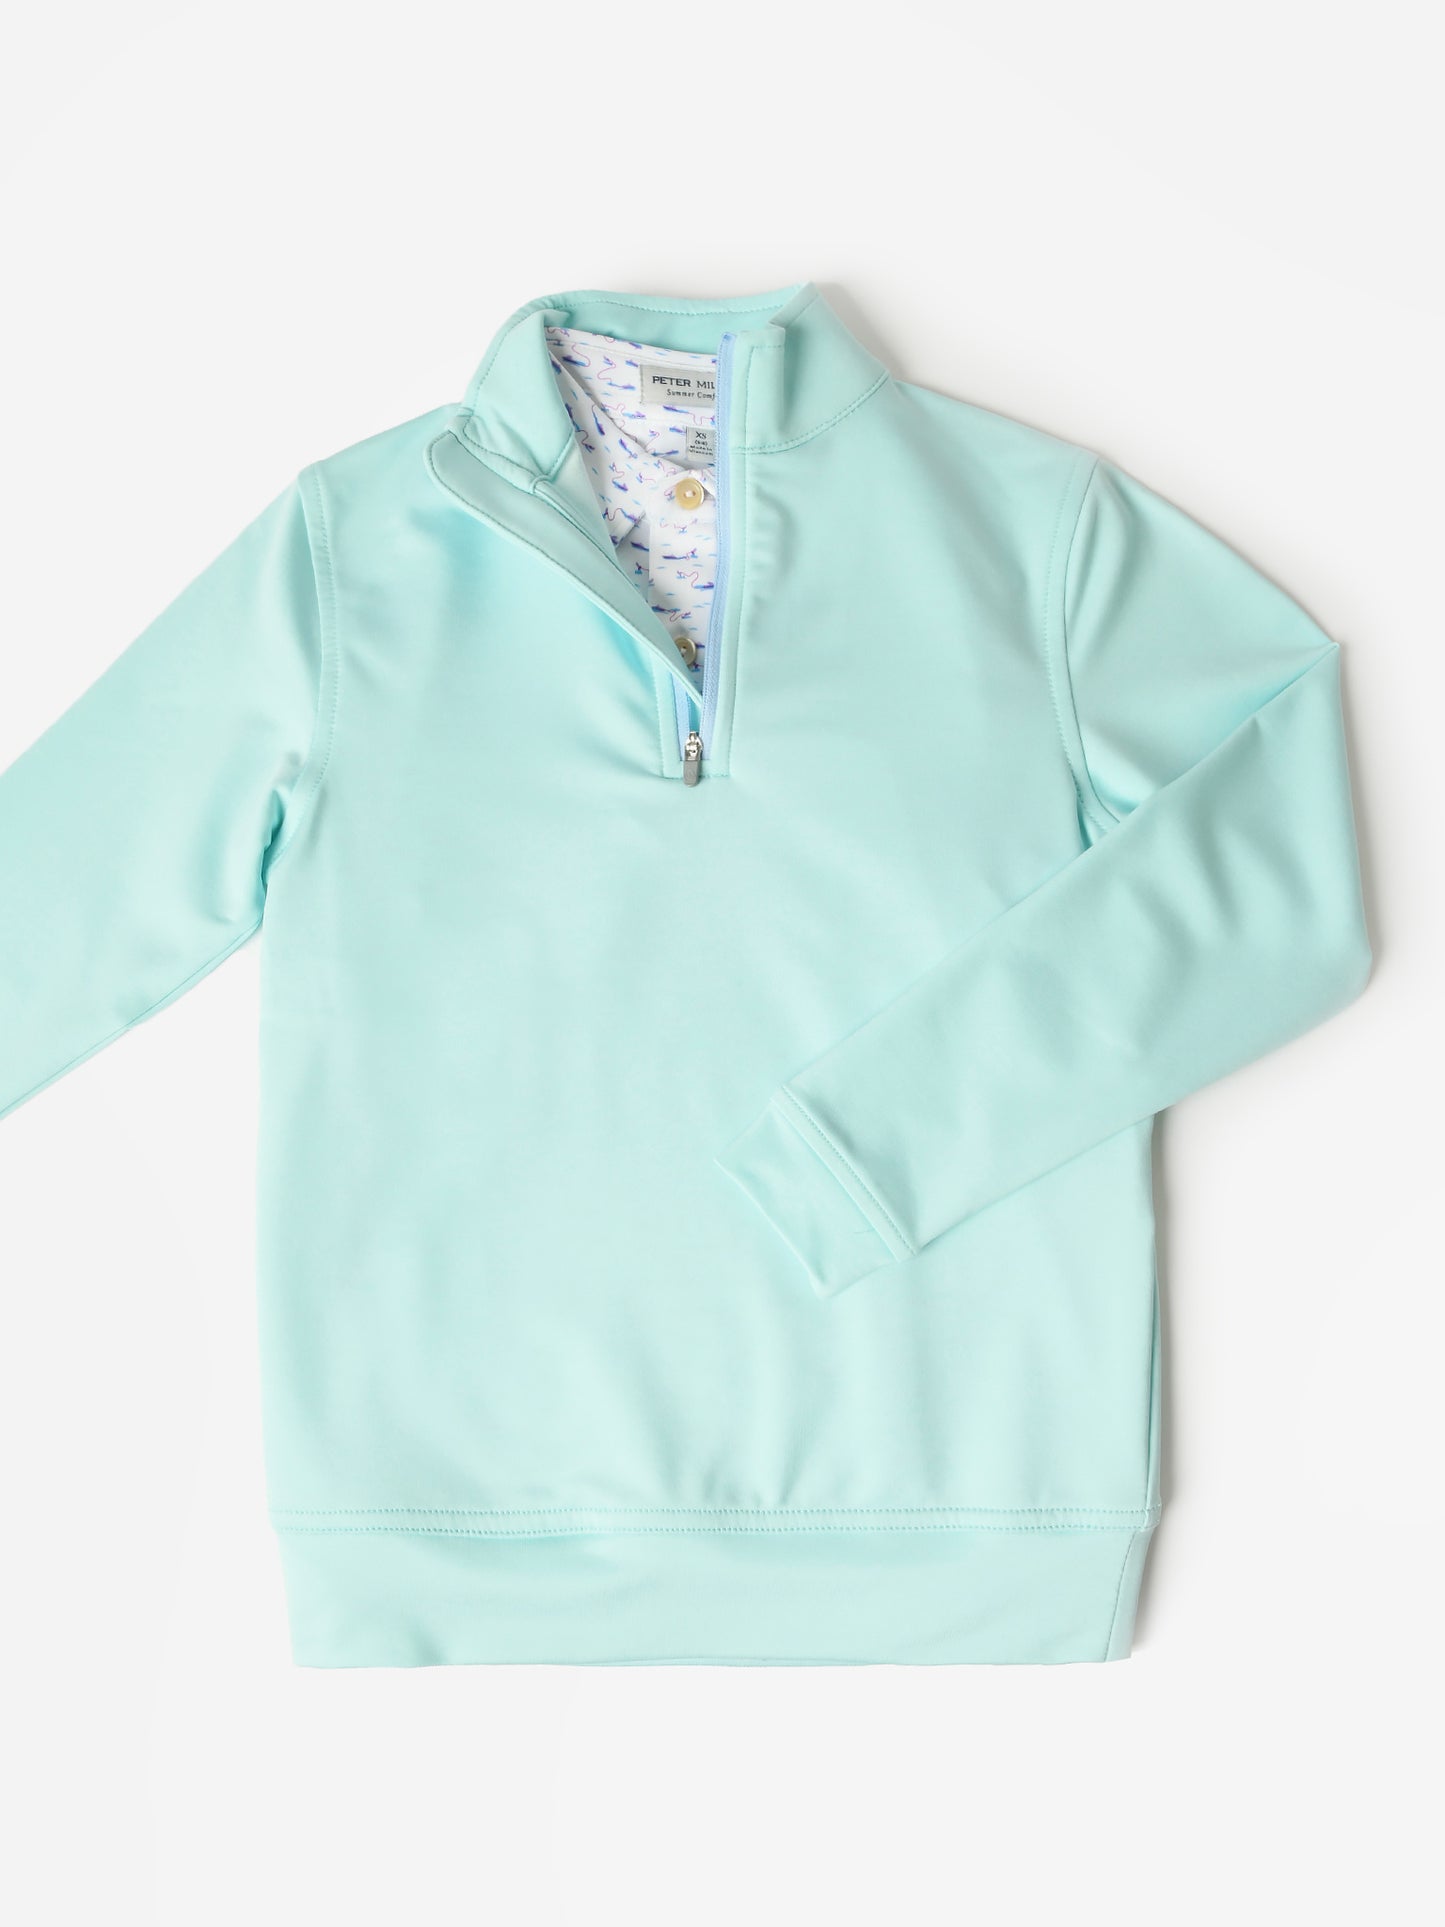 Peter Millar Youth Collection Boys' Perth Mélange Performance Quarter-Zip